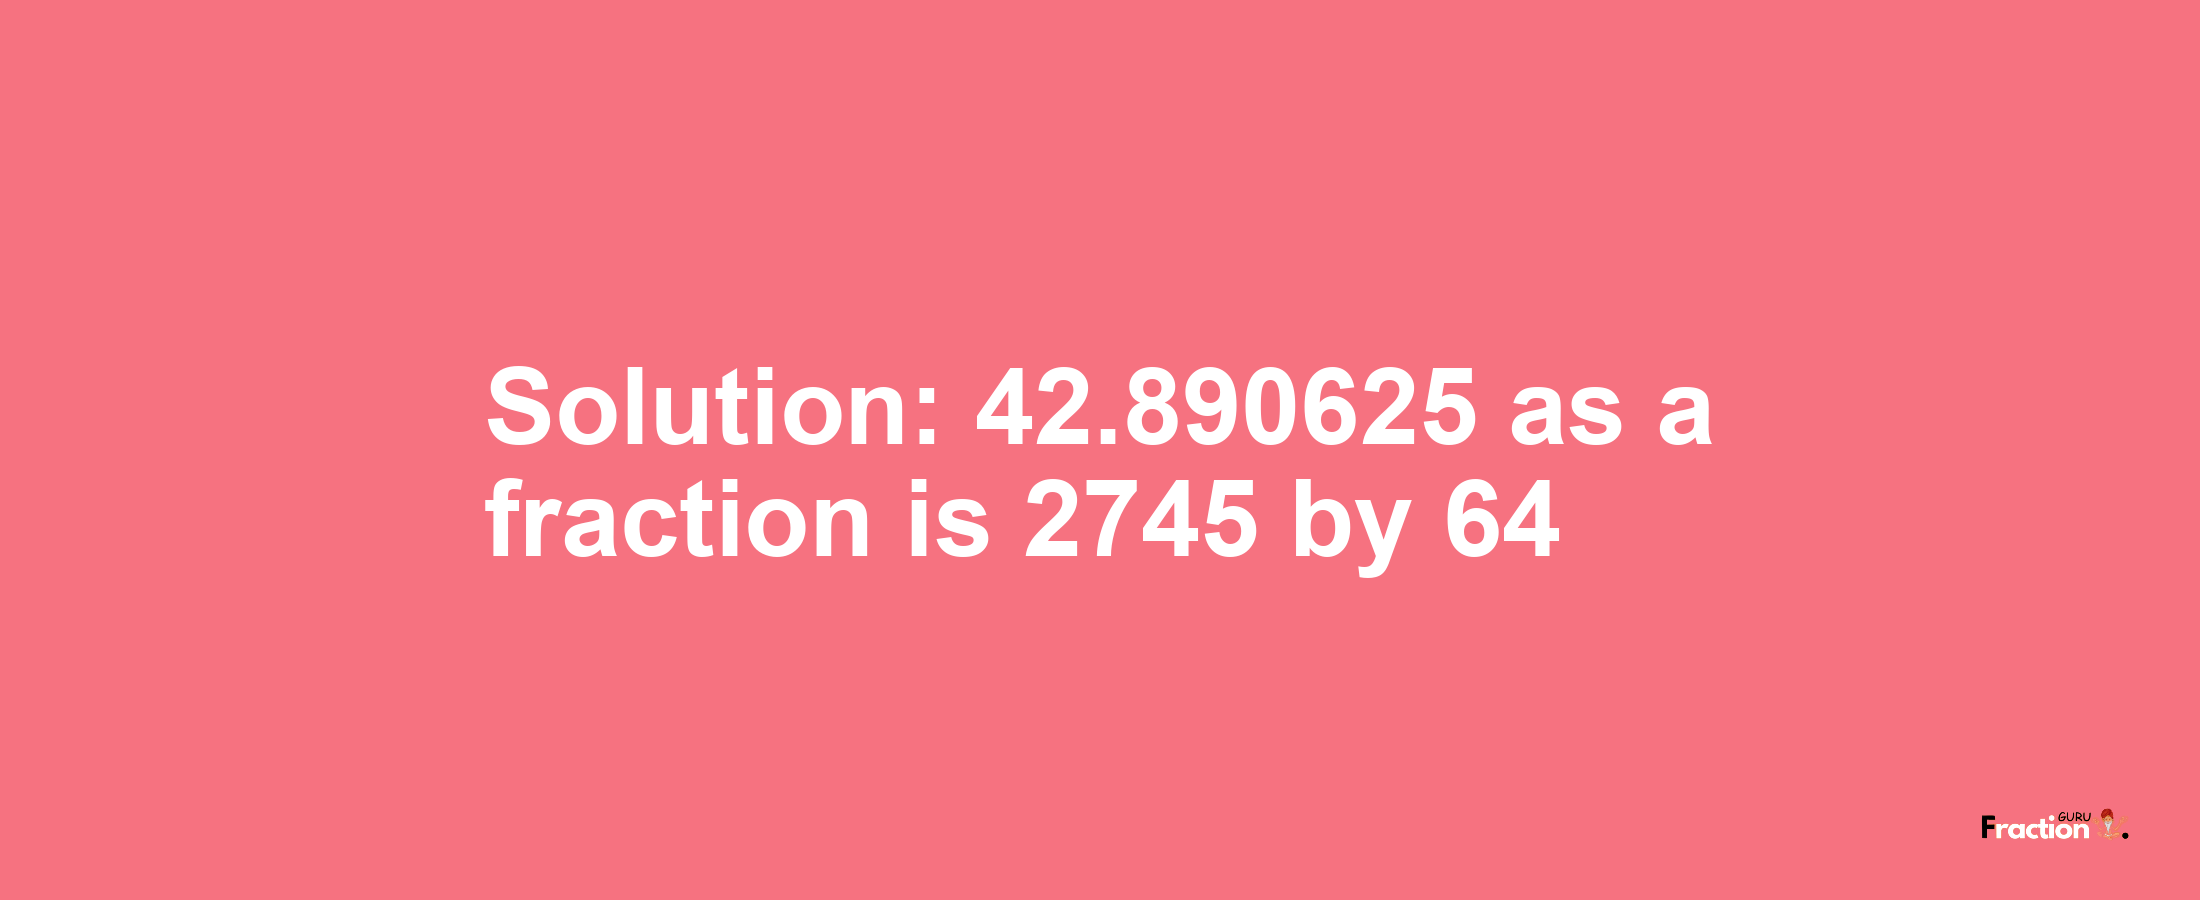 Solution:42.890625 as a fraction is 2745/64